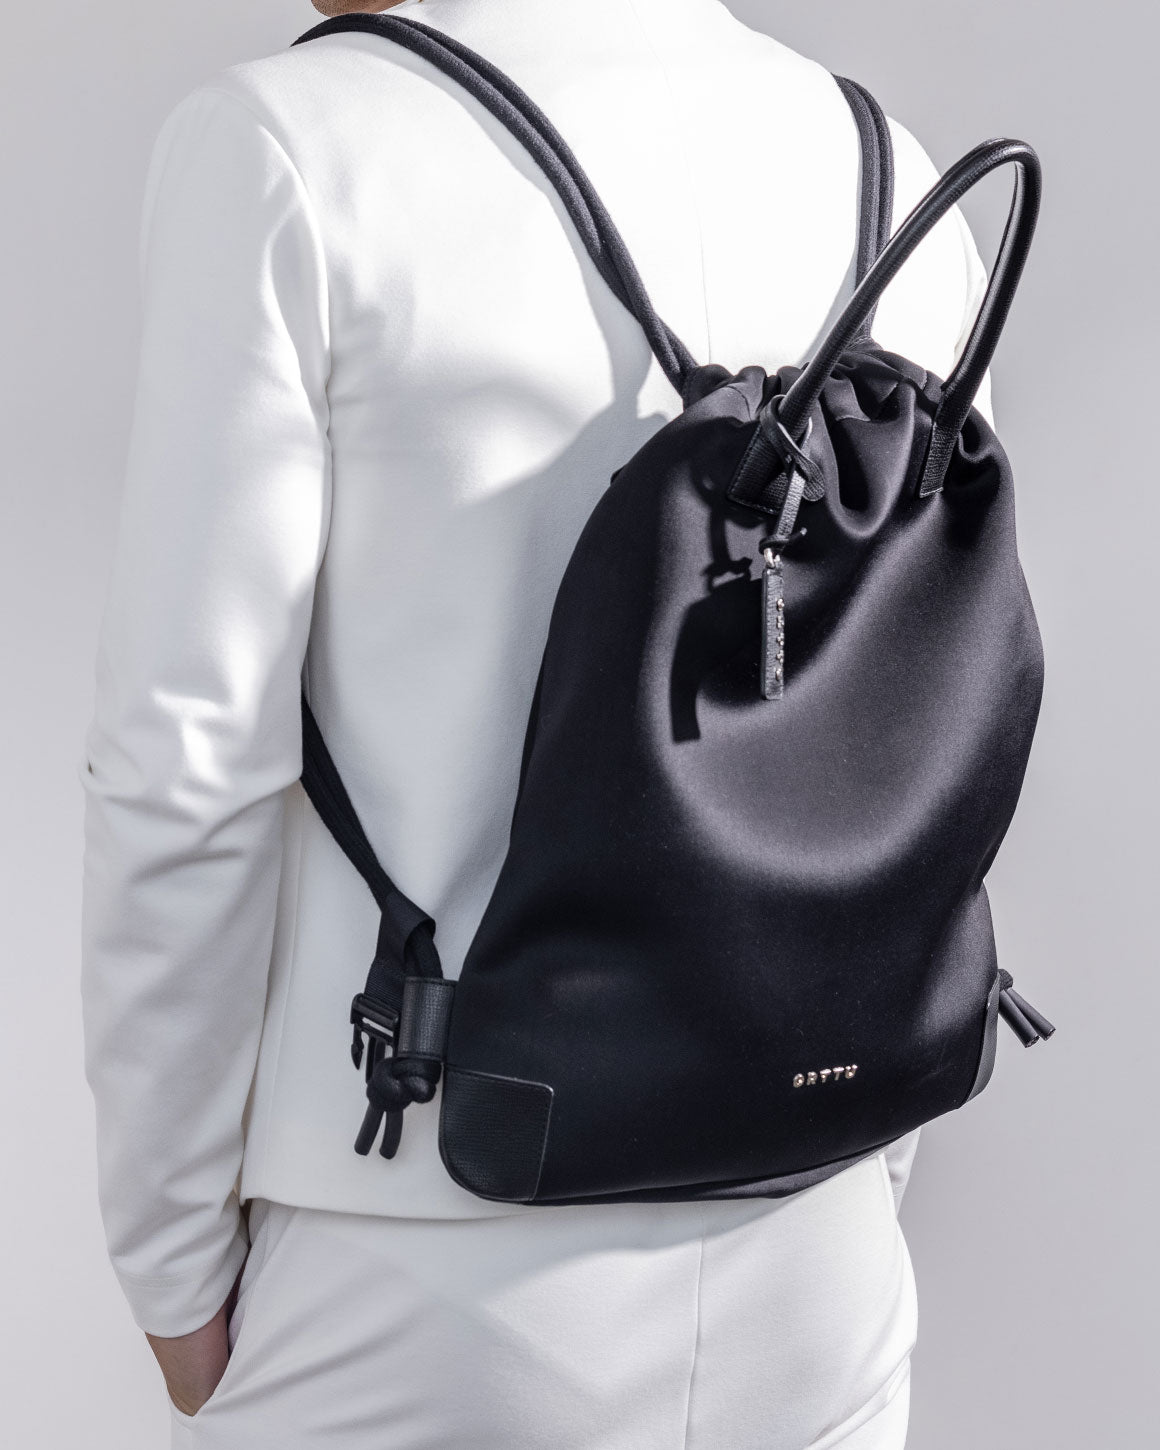 The Most Expensive Backpacks: Luxury Bags for the Discriminating